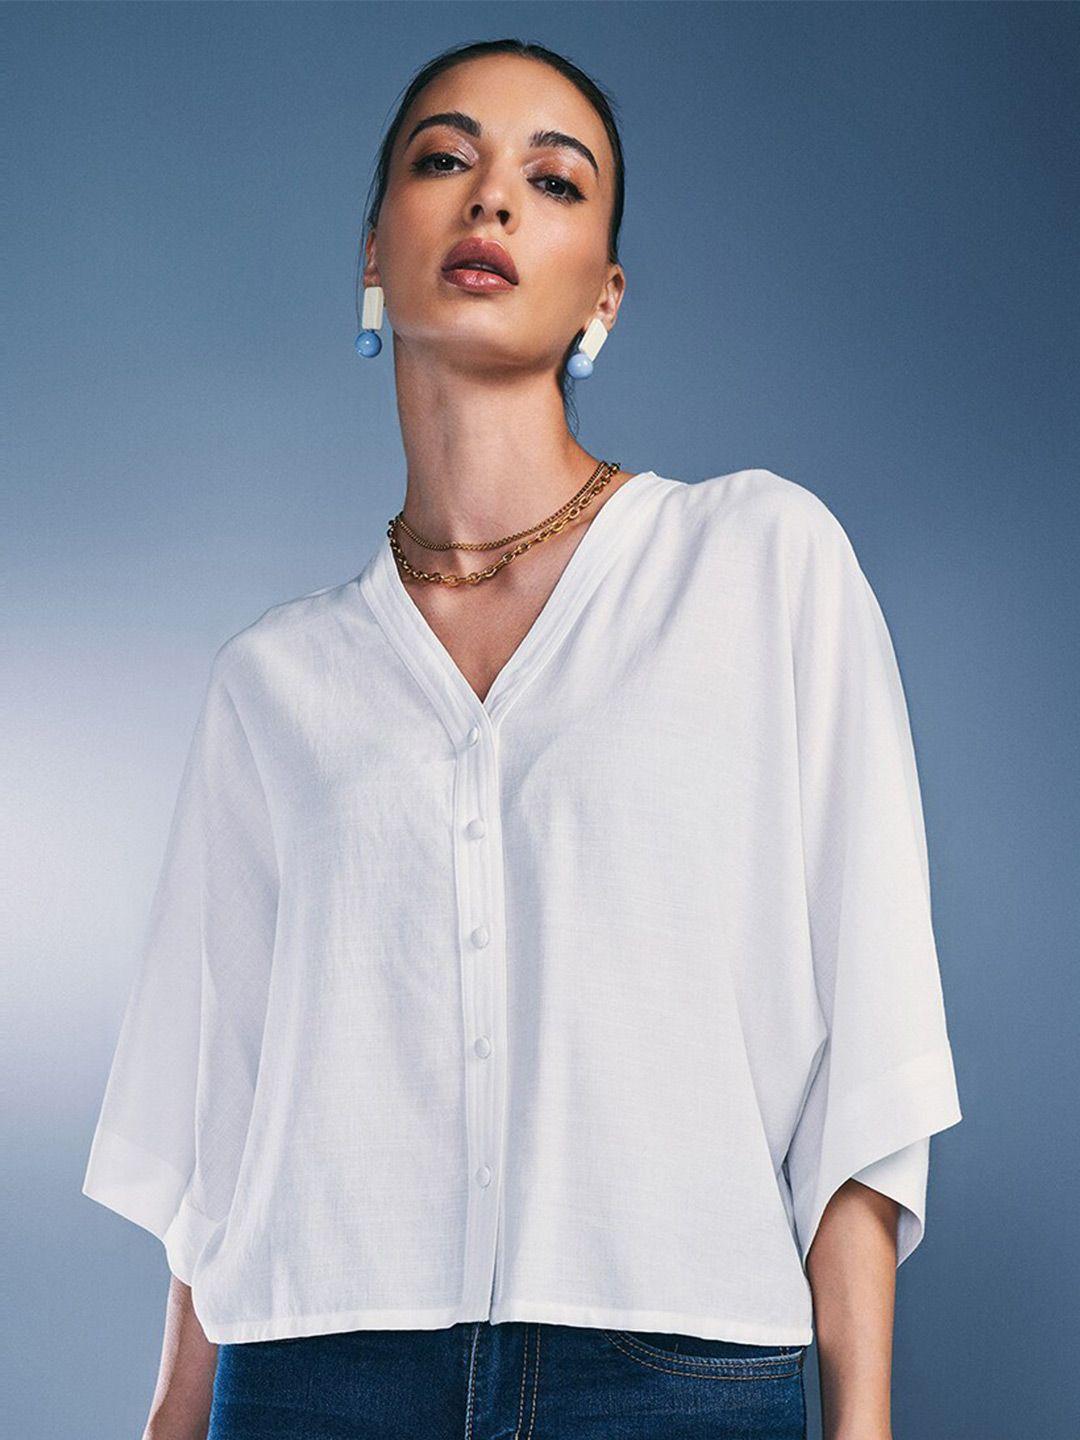 and extended sleeves shirt style top